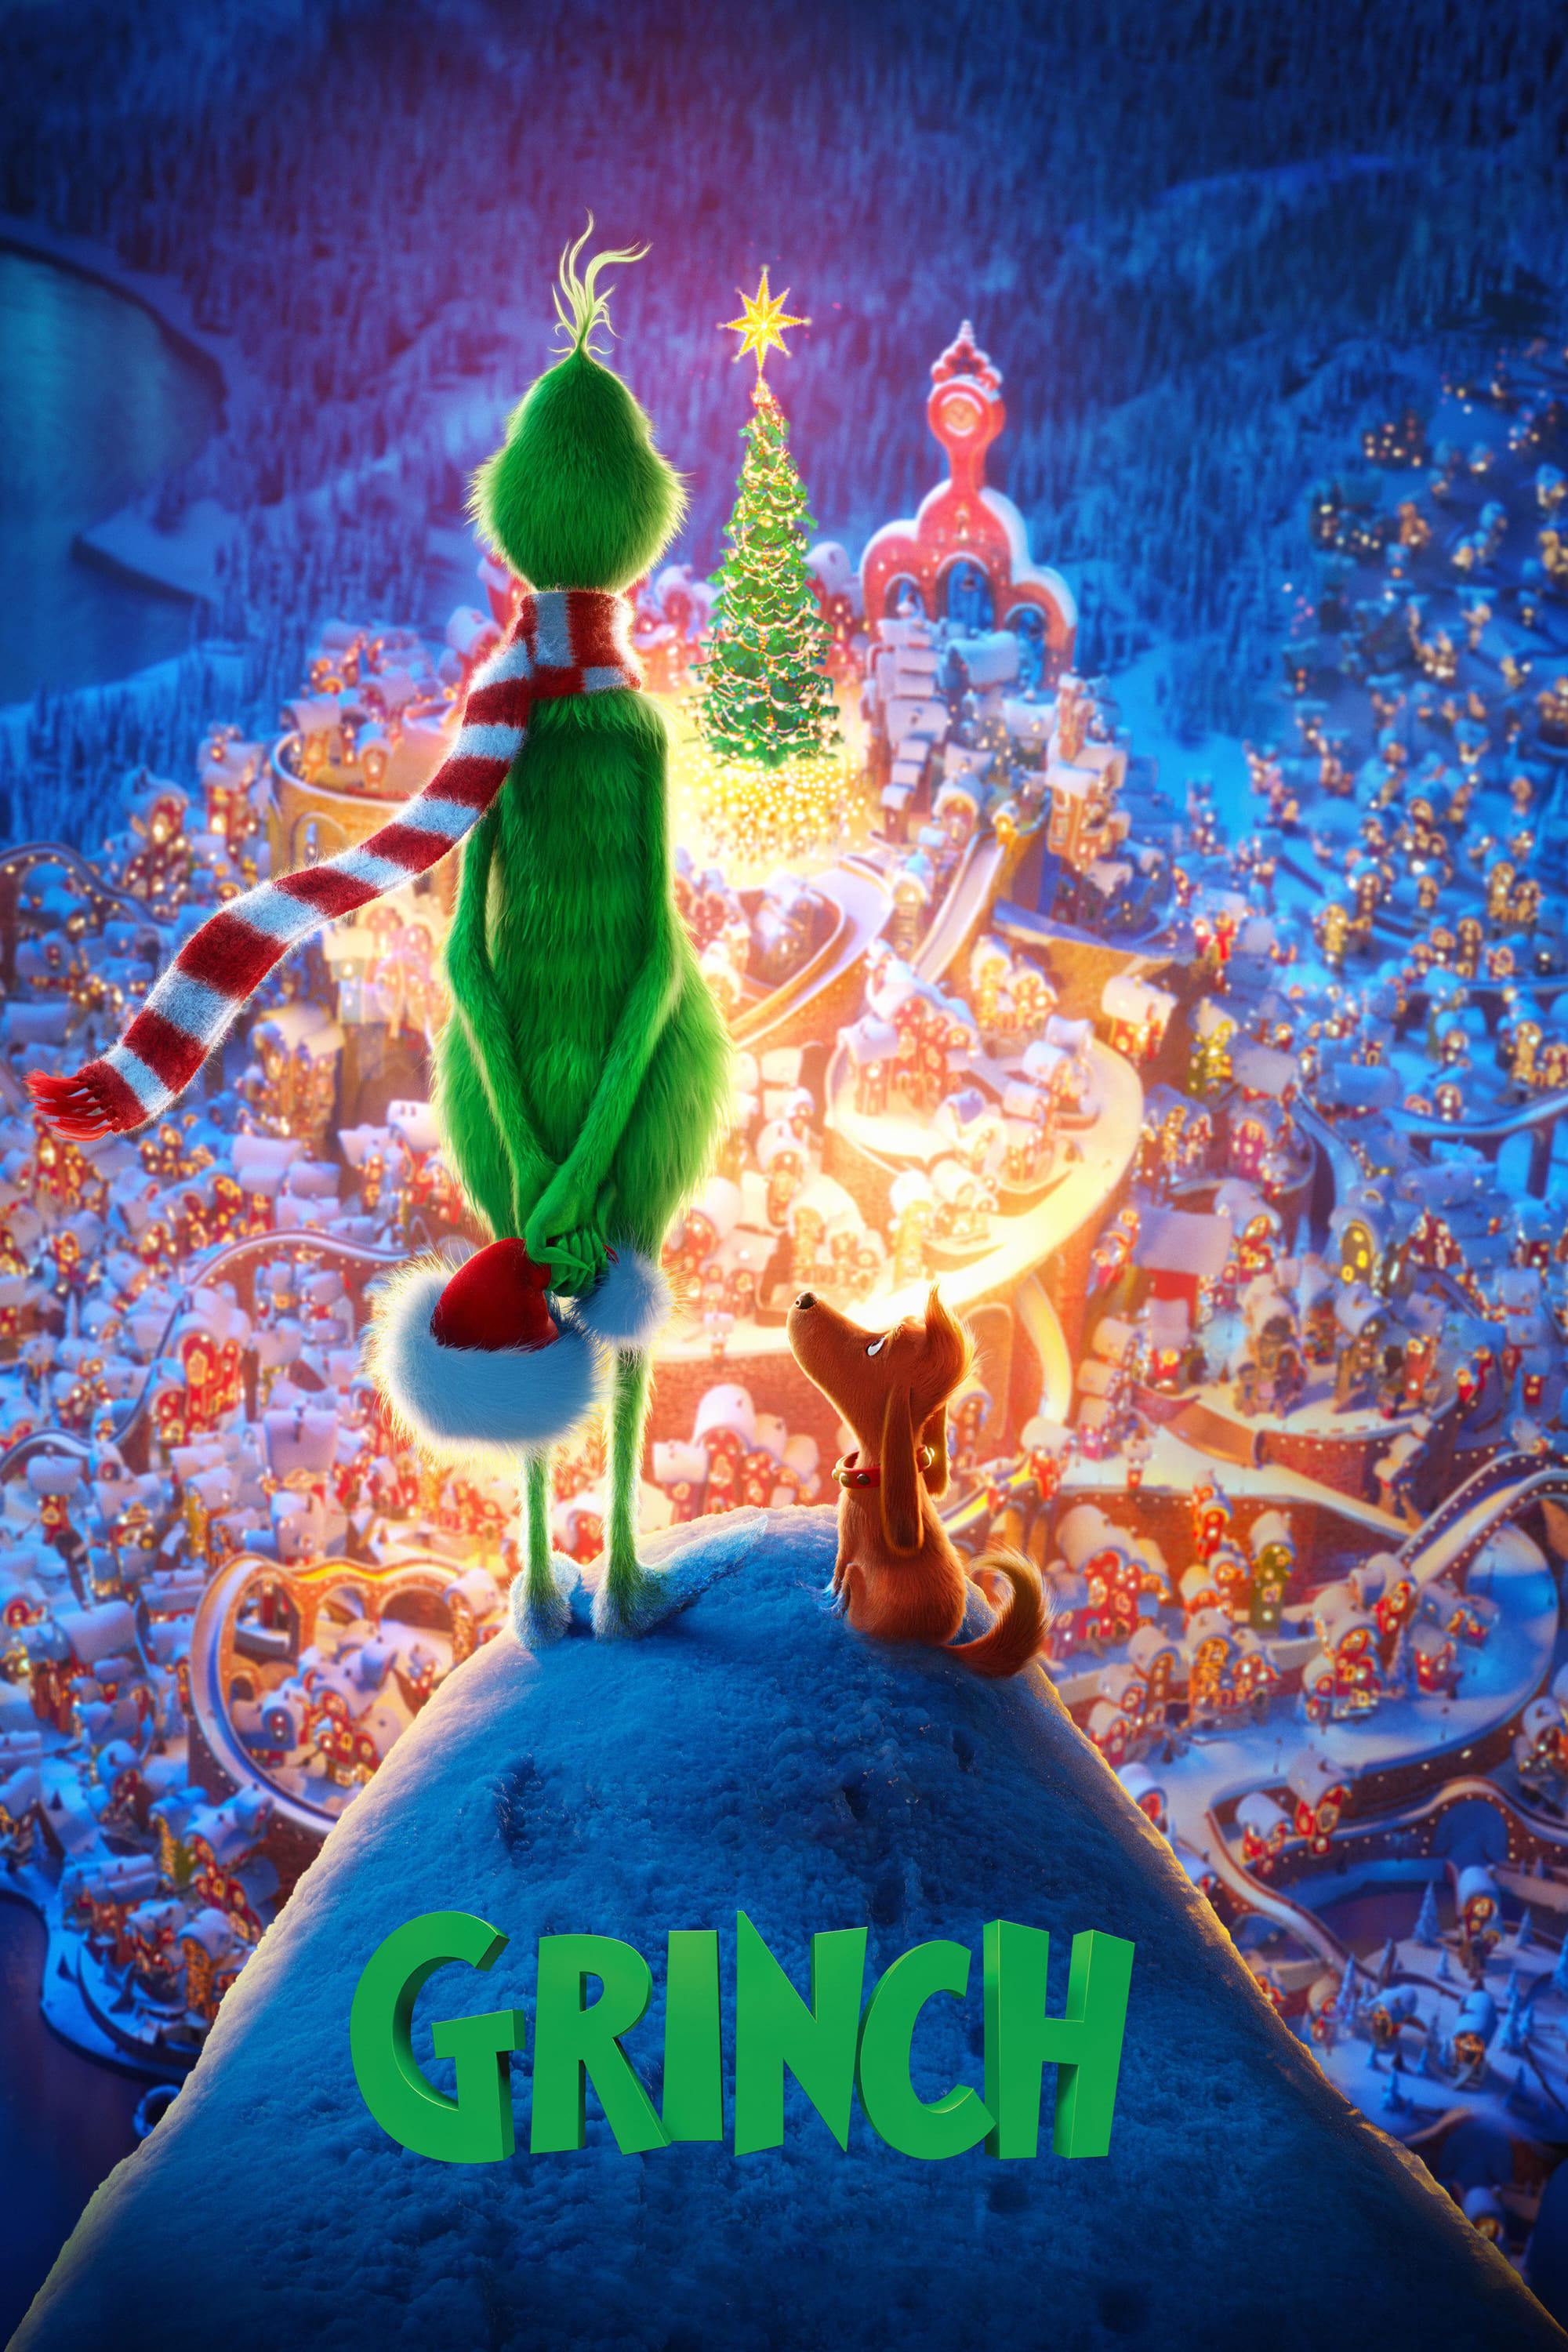 The Grinch movie poster